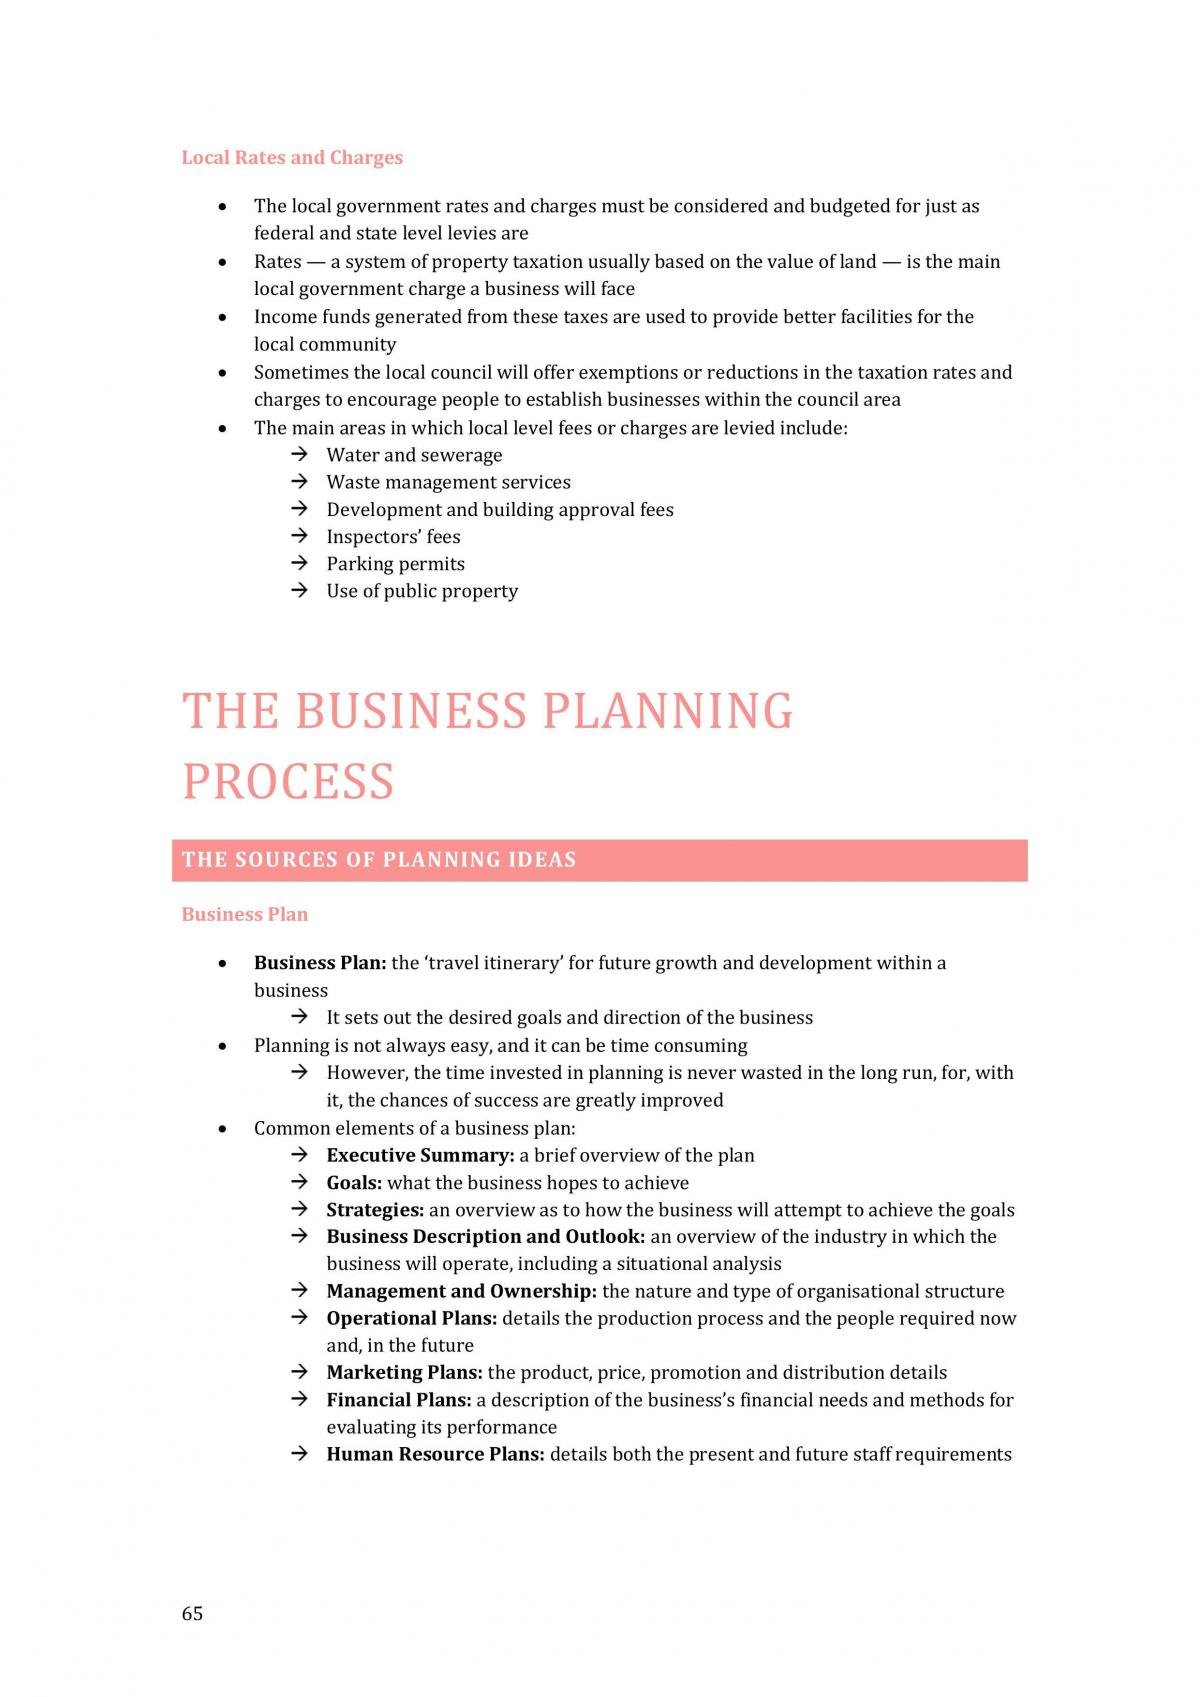 Business Studies Notes - Topic 3: Business Planning - Page 15